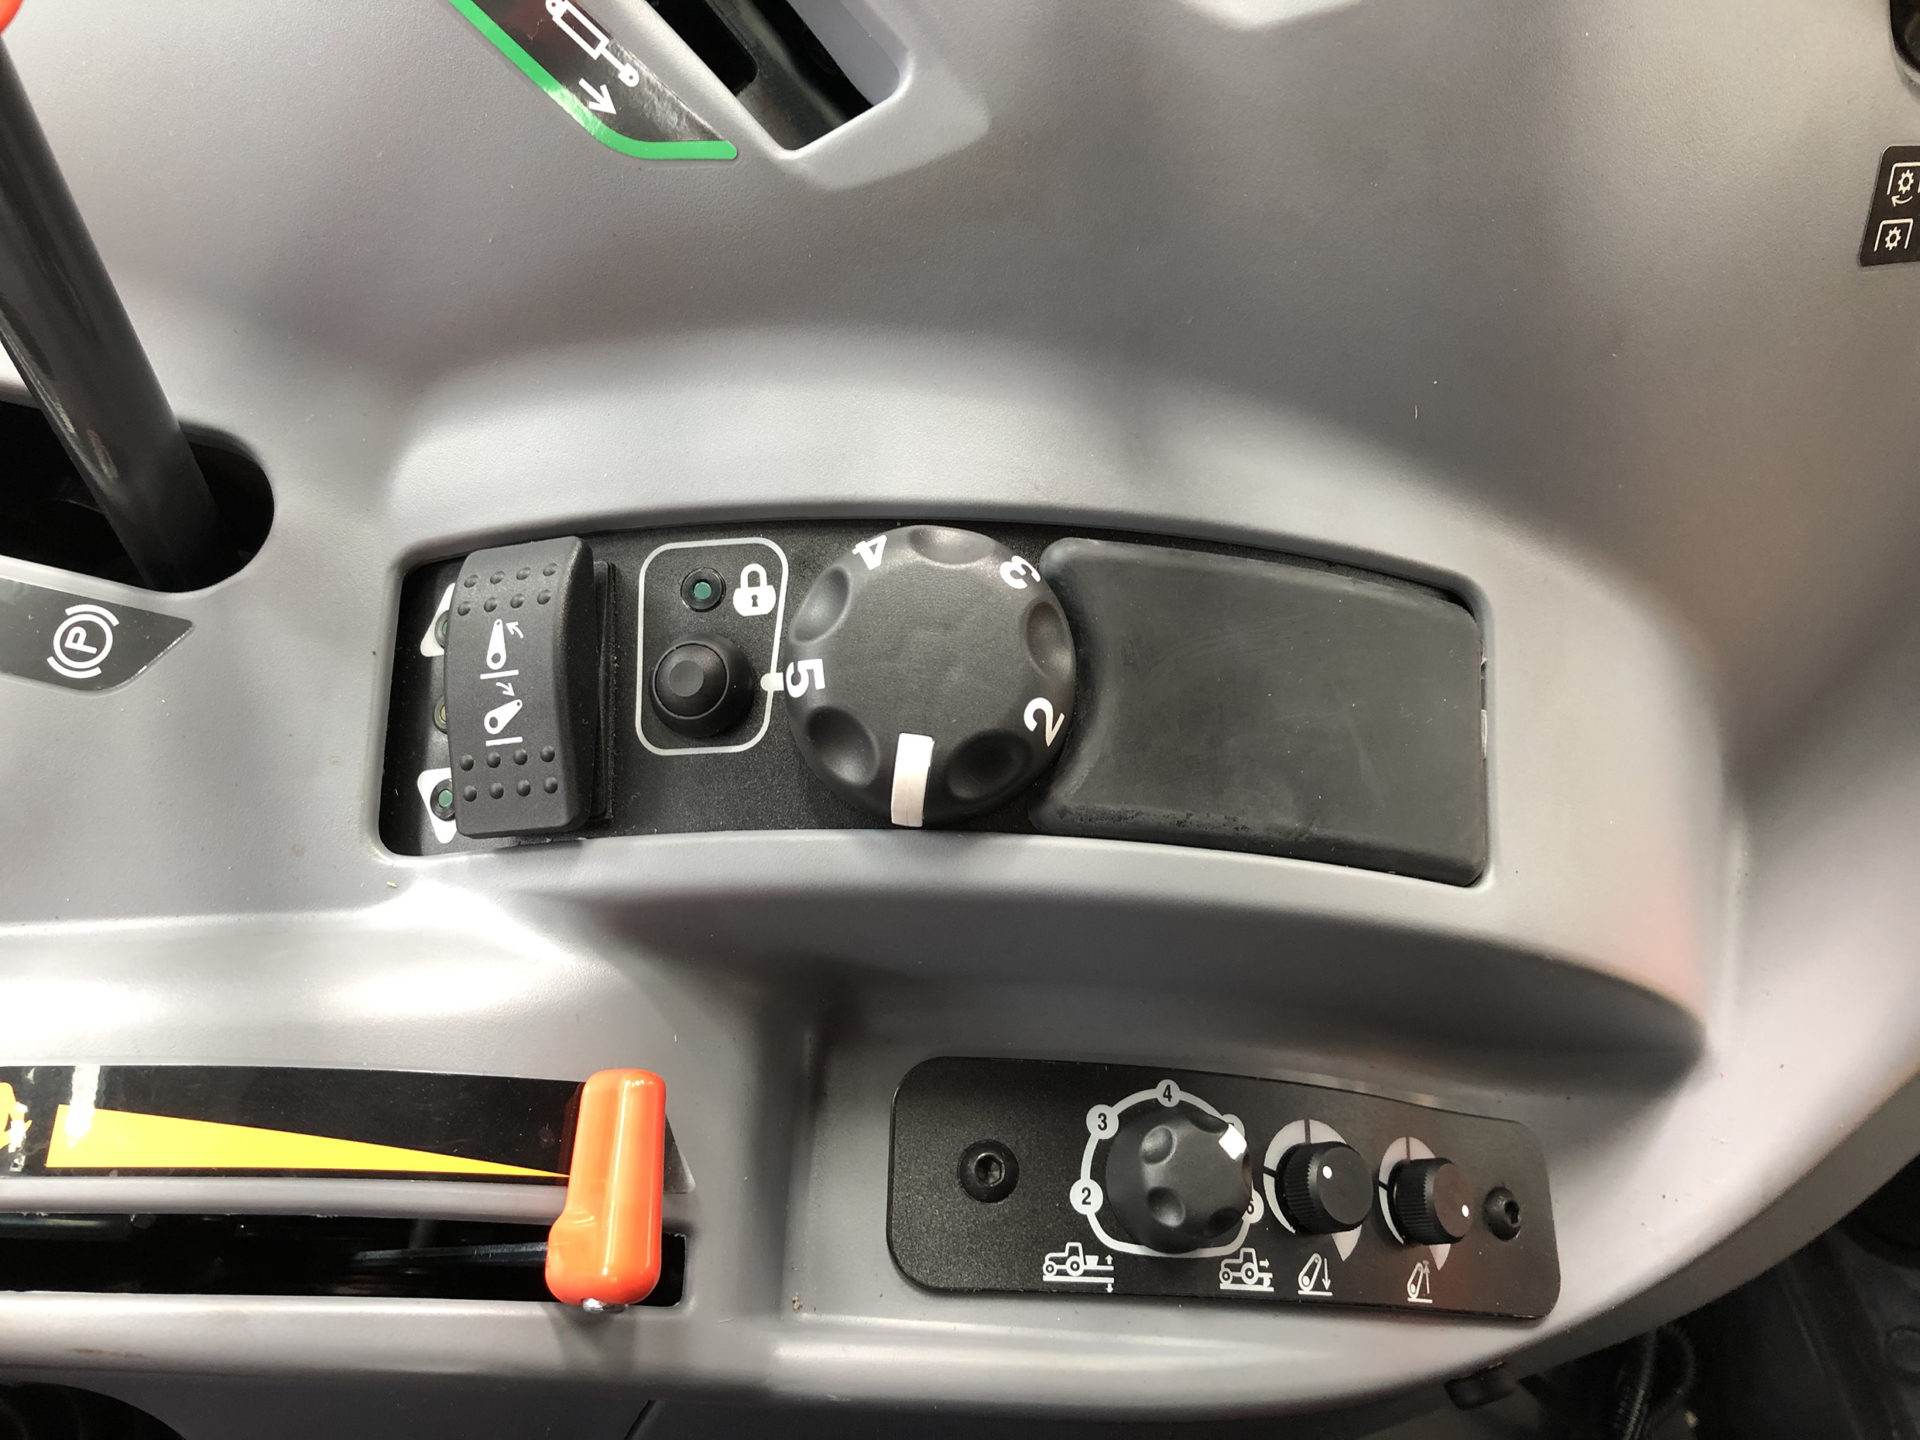 Electronic rear lift control available for M5001 tractors